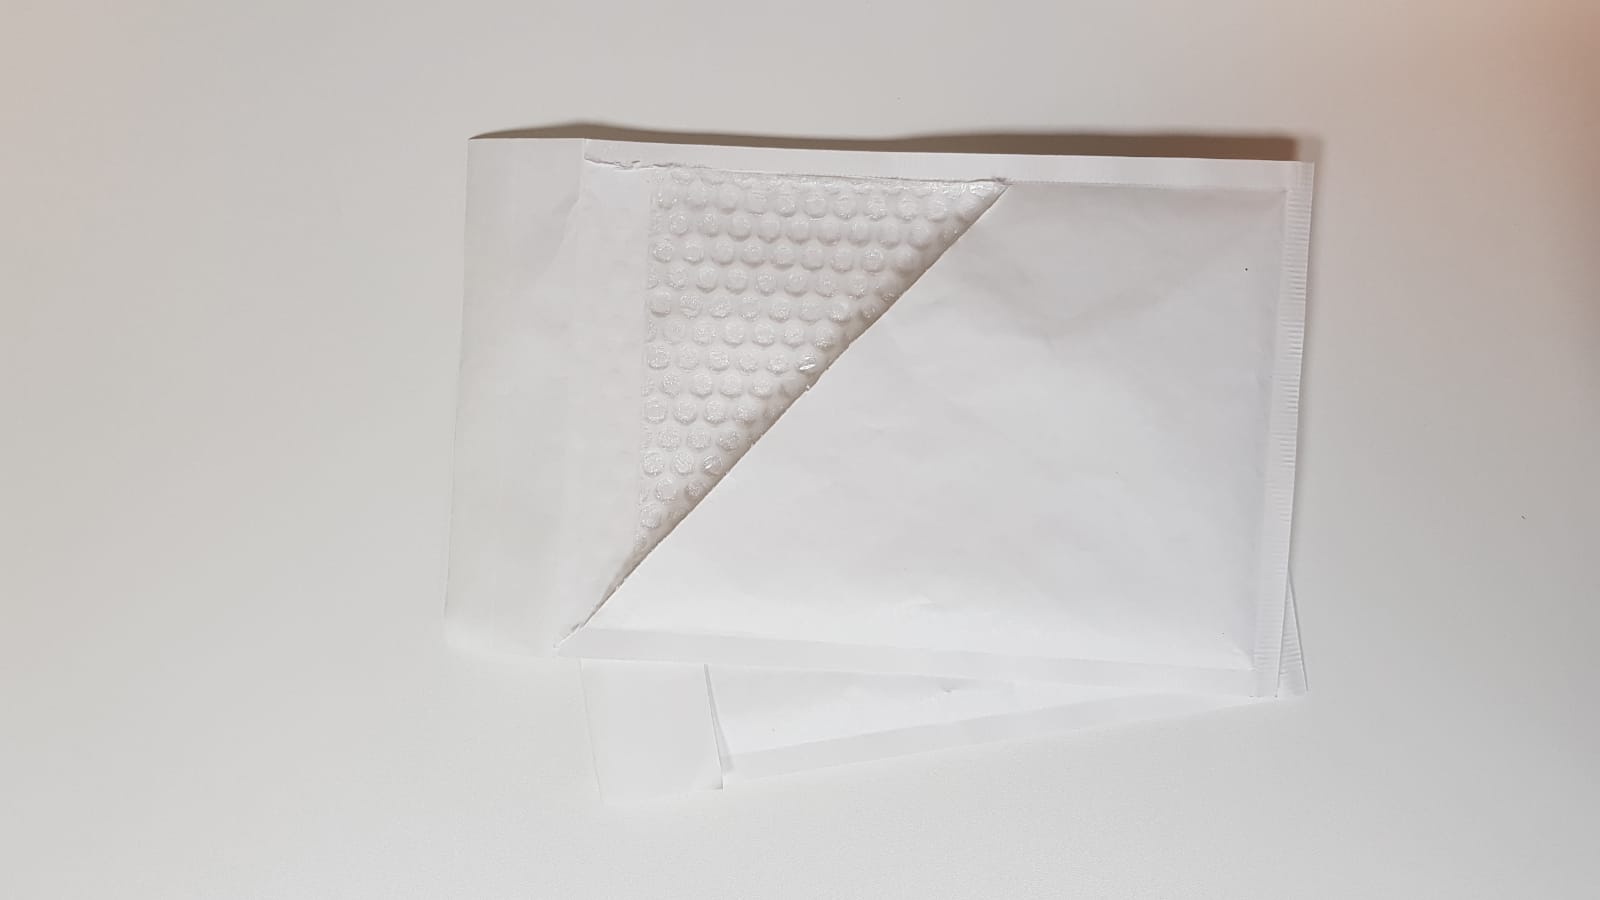 Padded bag 220 X 210 (and various sizes) - Airship White Peel & Seal Padded Bags